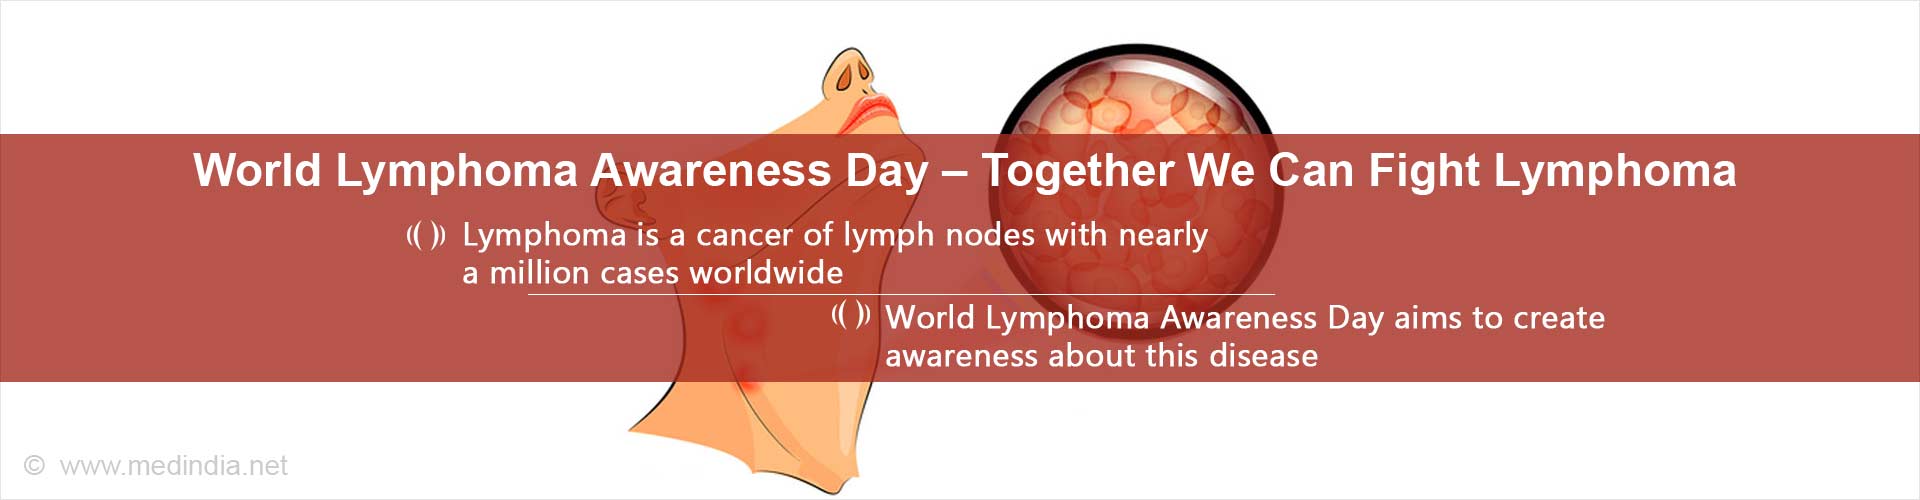 World Lymphoma Awareness Day: Together We can Fight Lymphoma
- Lymphoma is a cancer of lymph modes with nearly a million cases worldwide
- World Lymphoma Awareness Day aims to create awareness about this disease